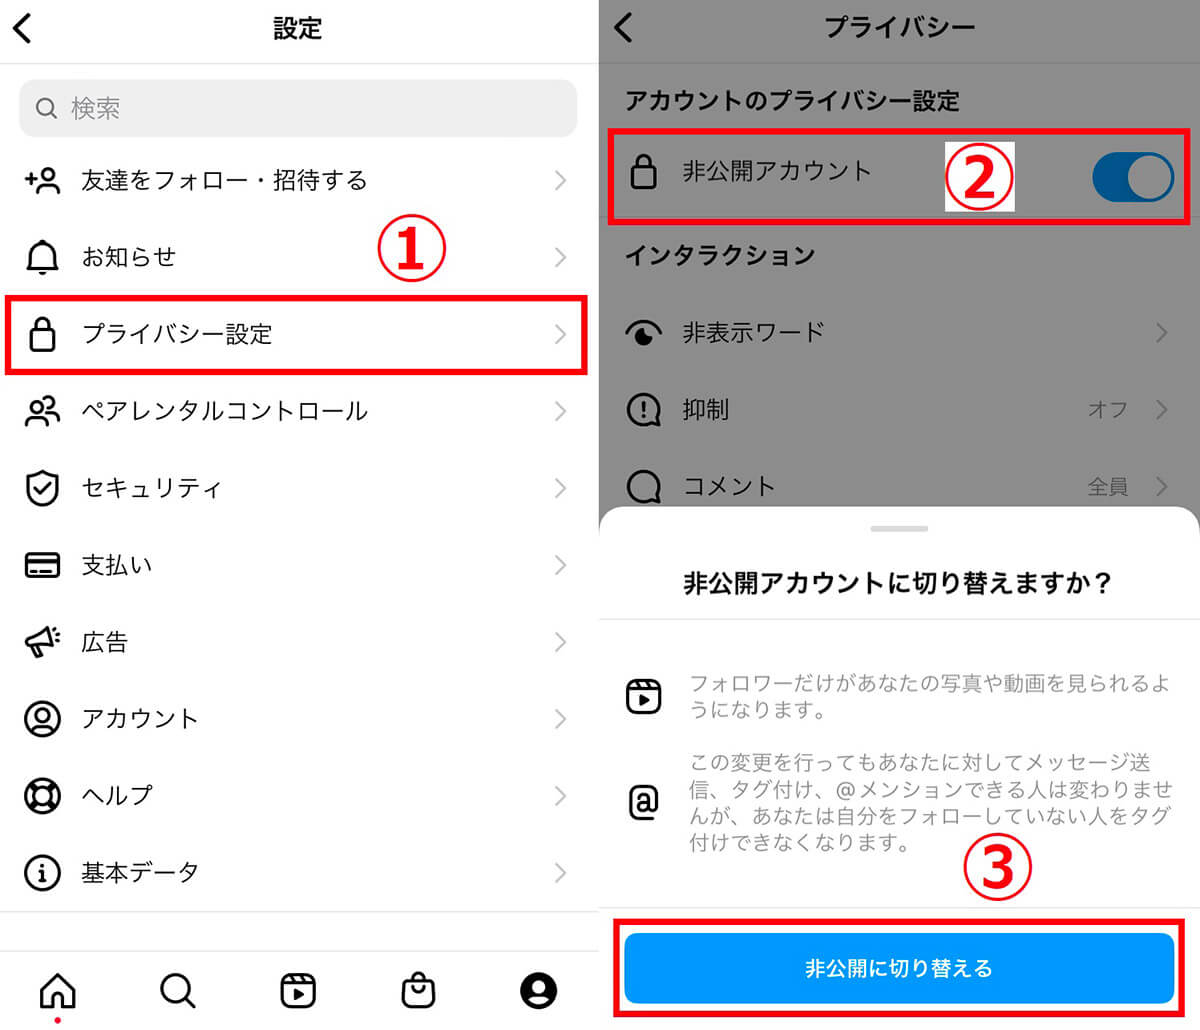 【iOS/Android】Instagramを非公開（鍵垢）にする方法2